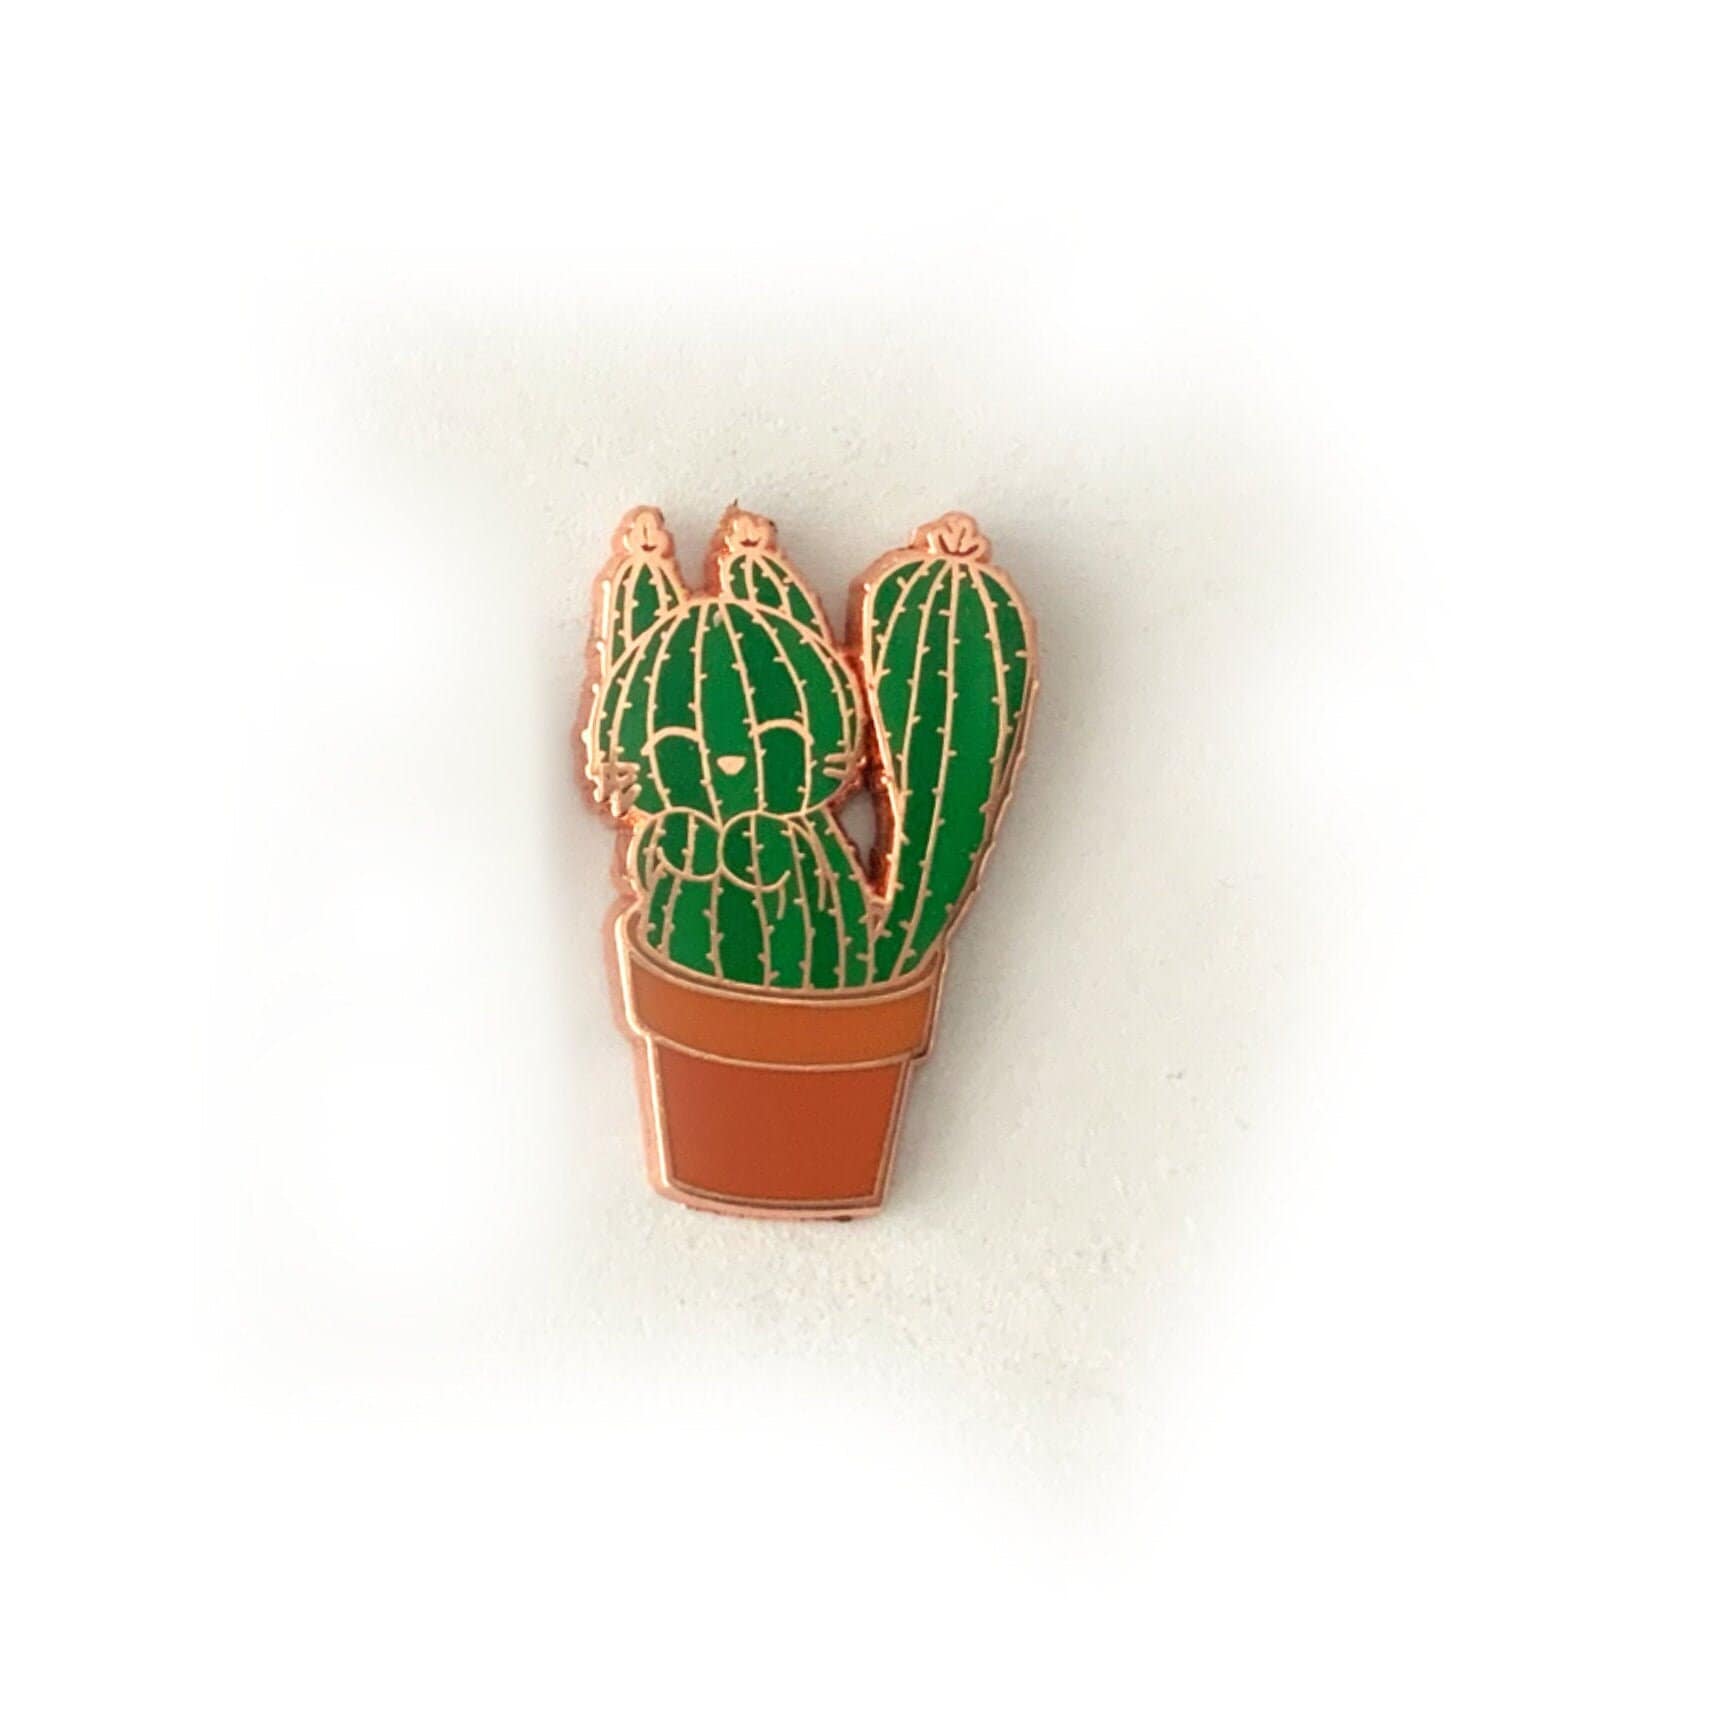 Cactus Cats - Small Enamel Pins, Set of 2, Mother’s Day Gift, Pins, Brooches & Lapel Pins